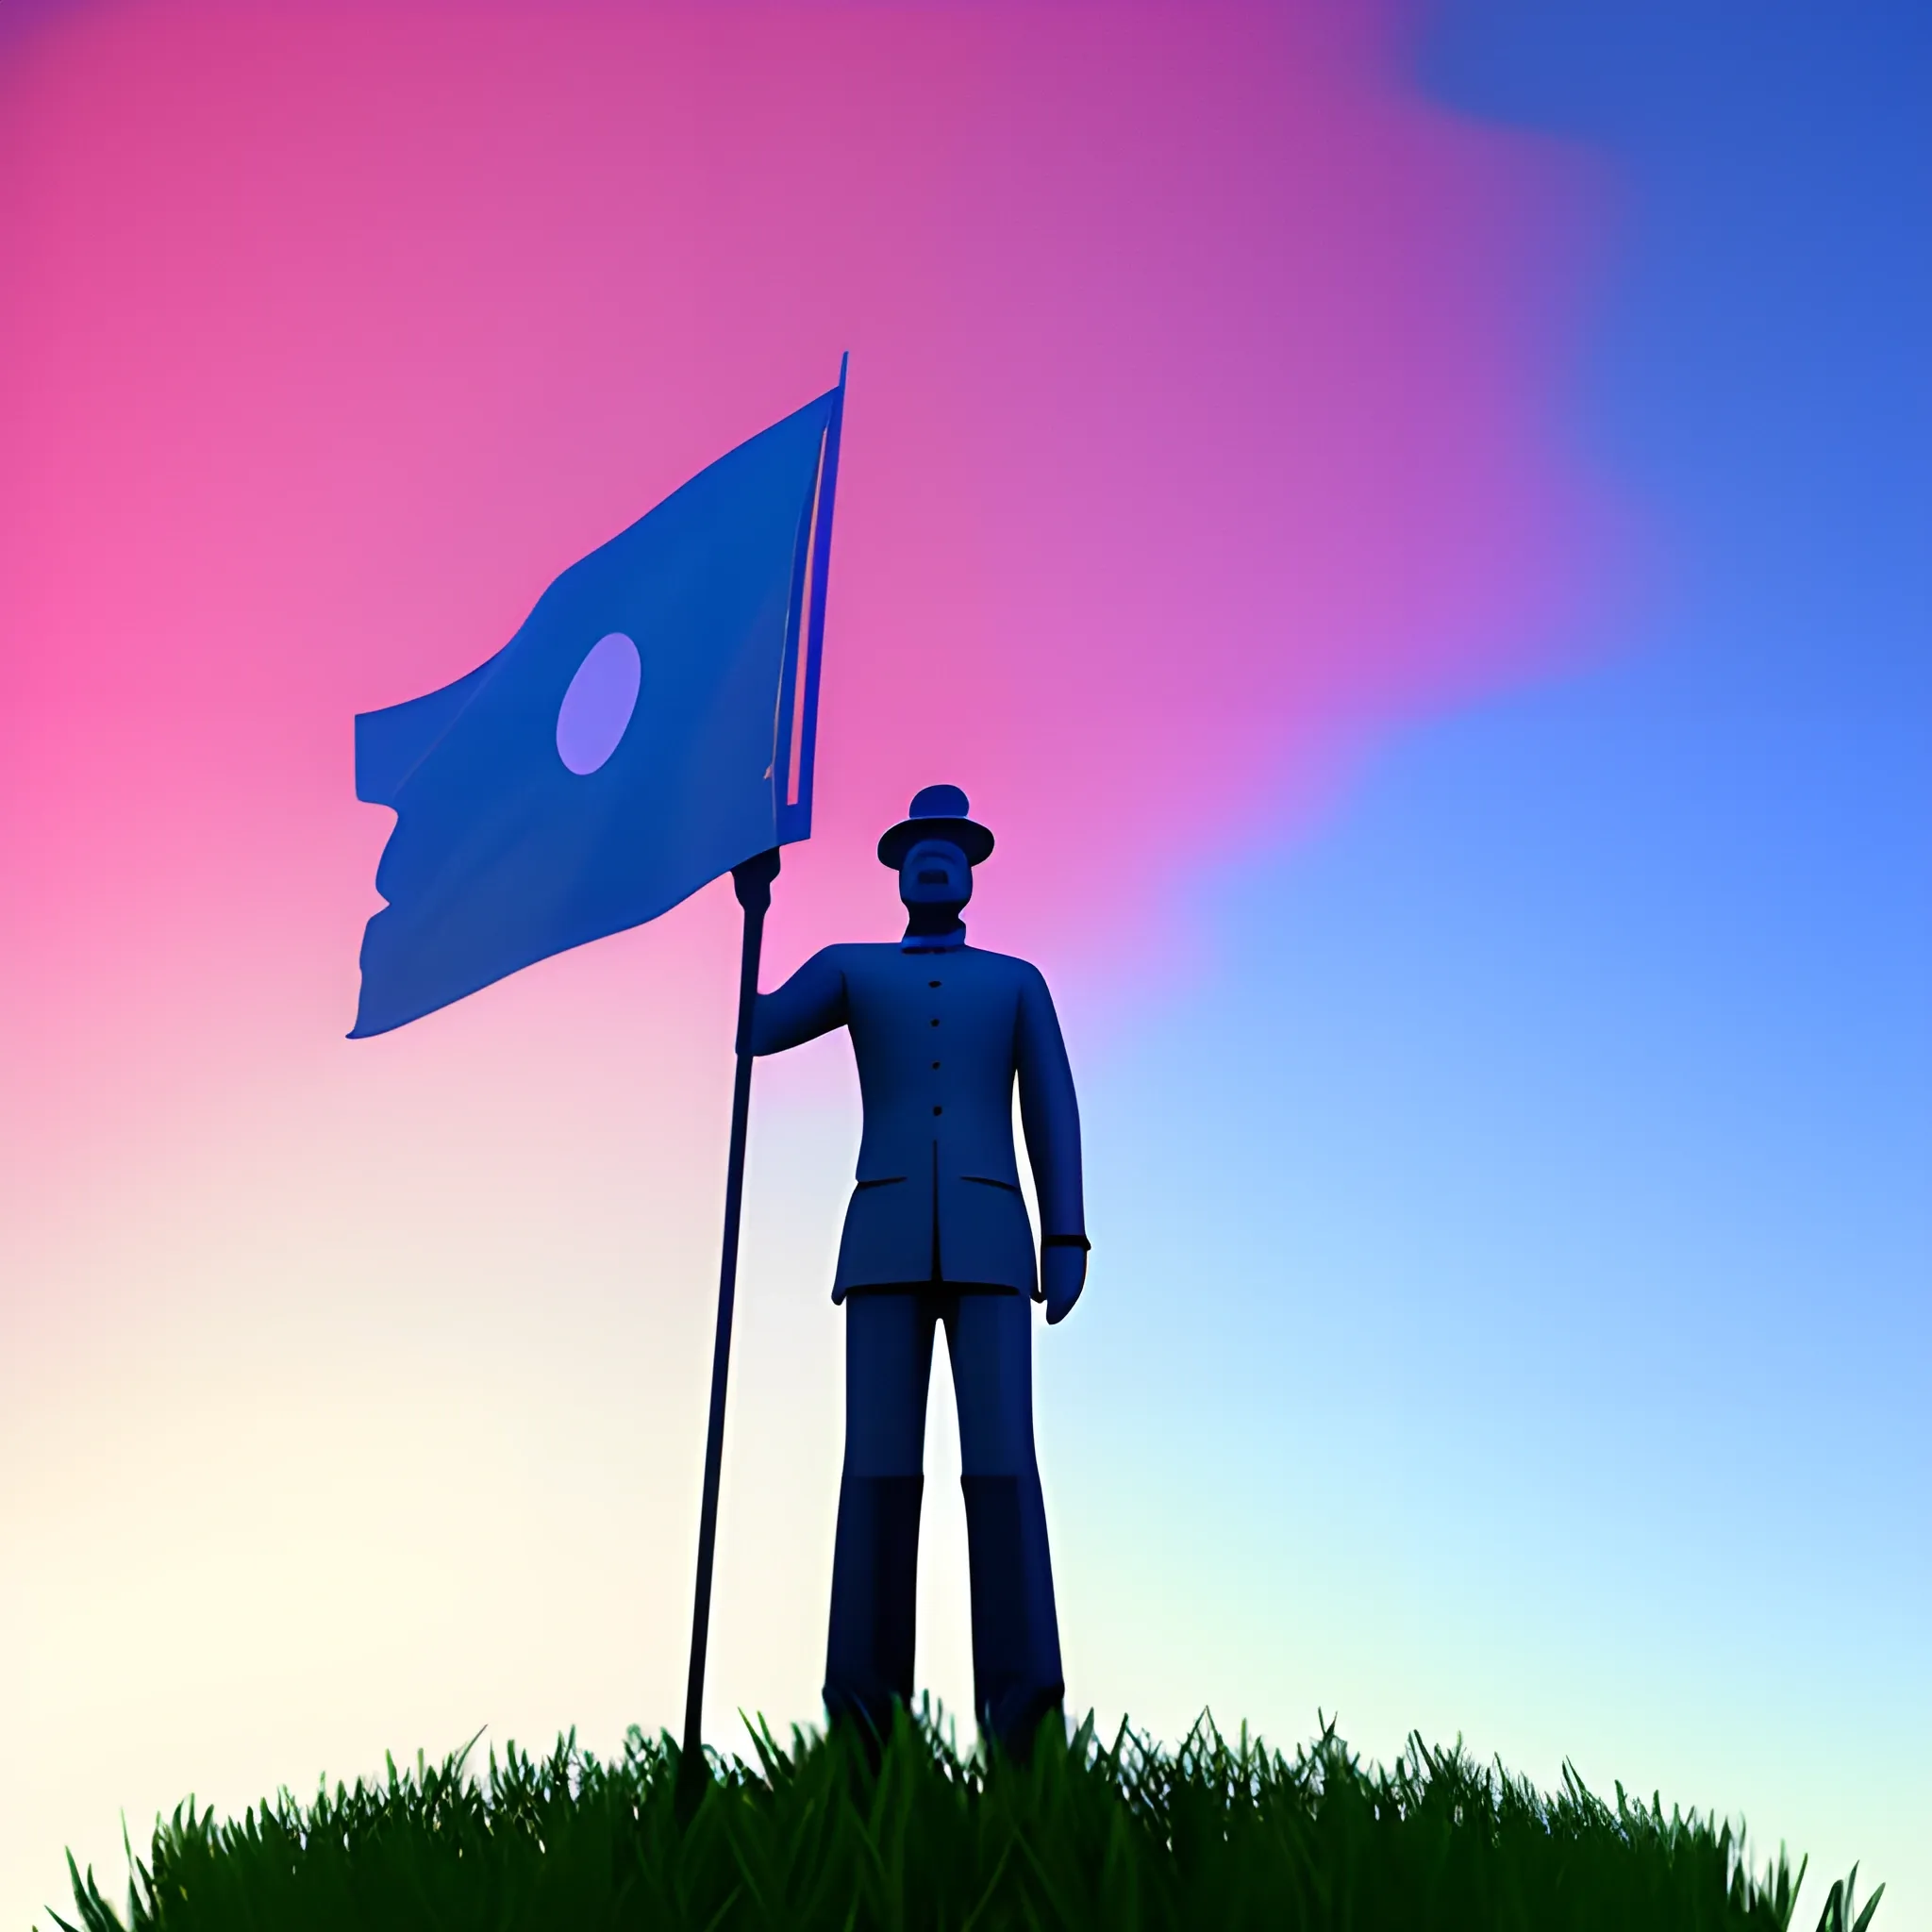 Trippy, 3D, me standing on top of the hill waving mobile lefend game s flag